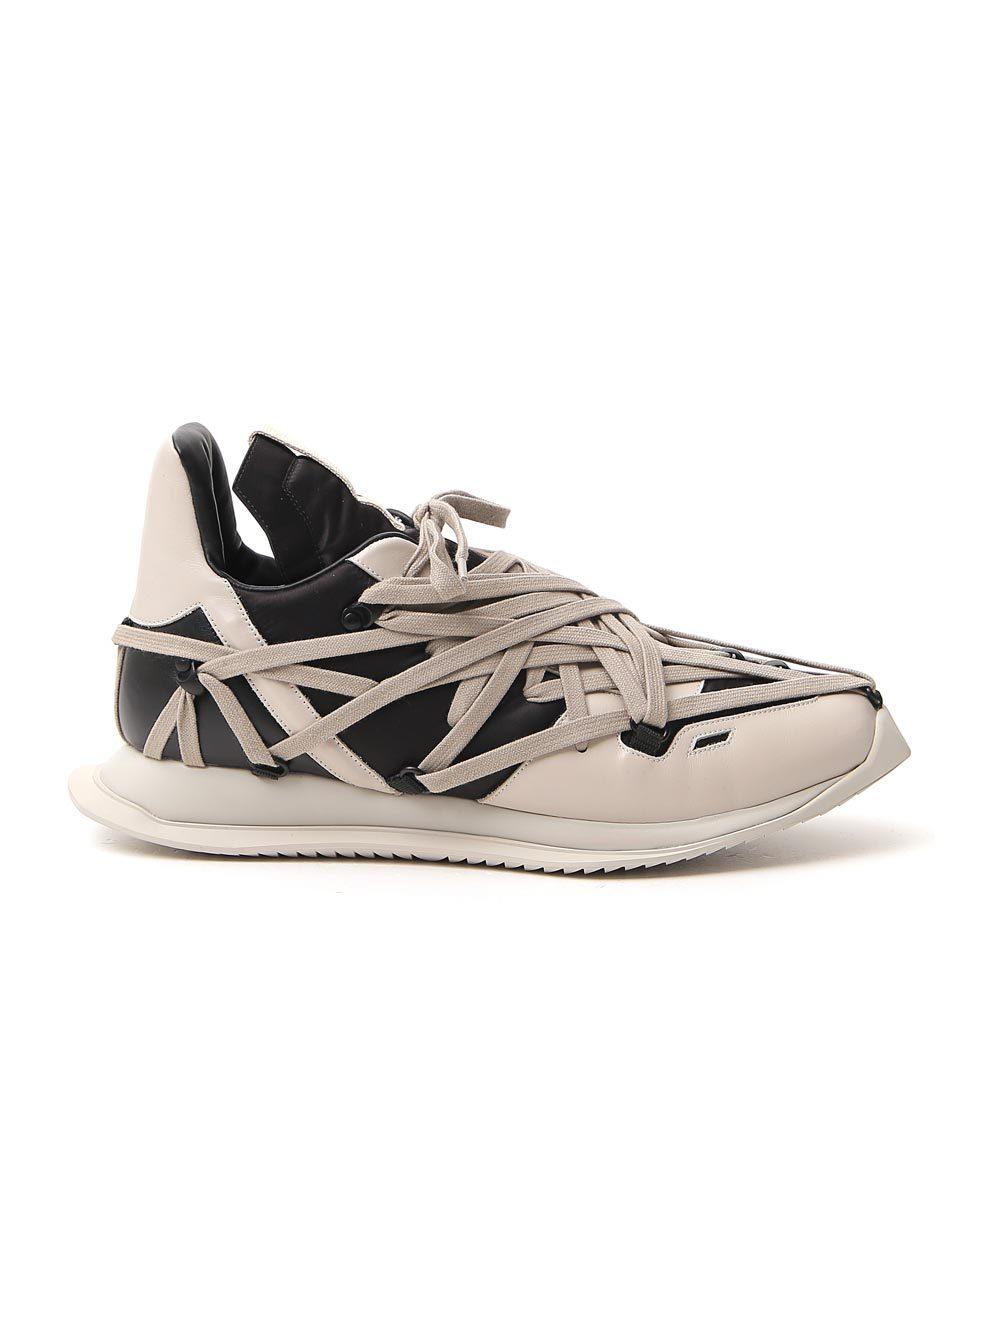 Rick Owens Lace Construction Sneakers for Men - Lyst